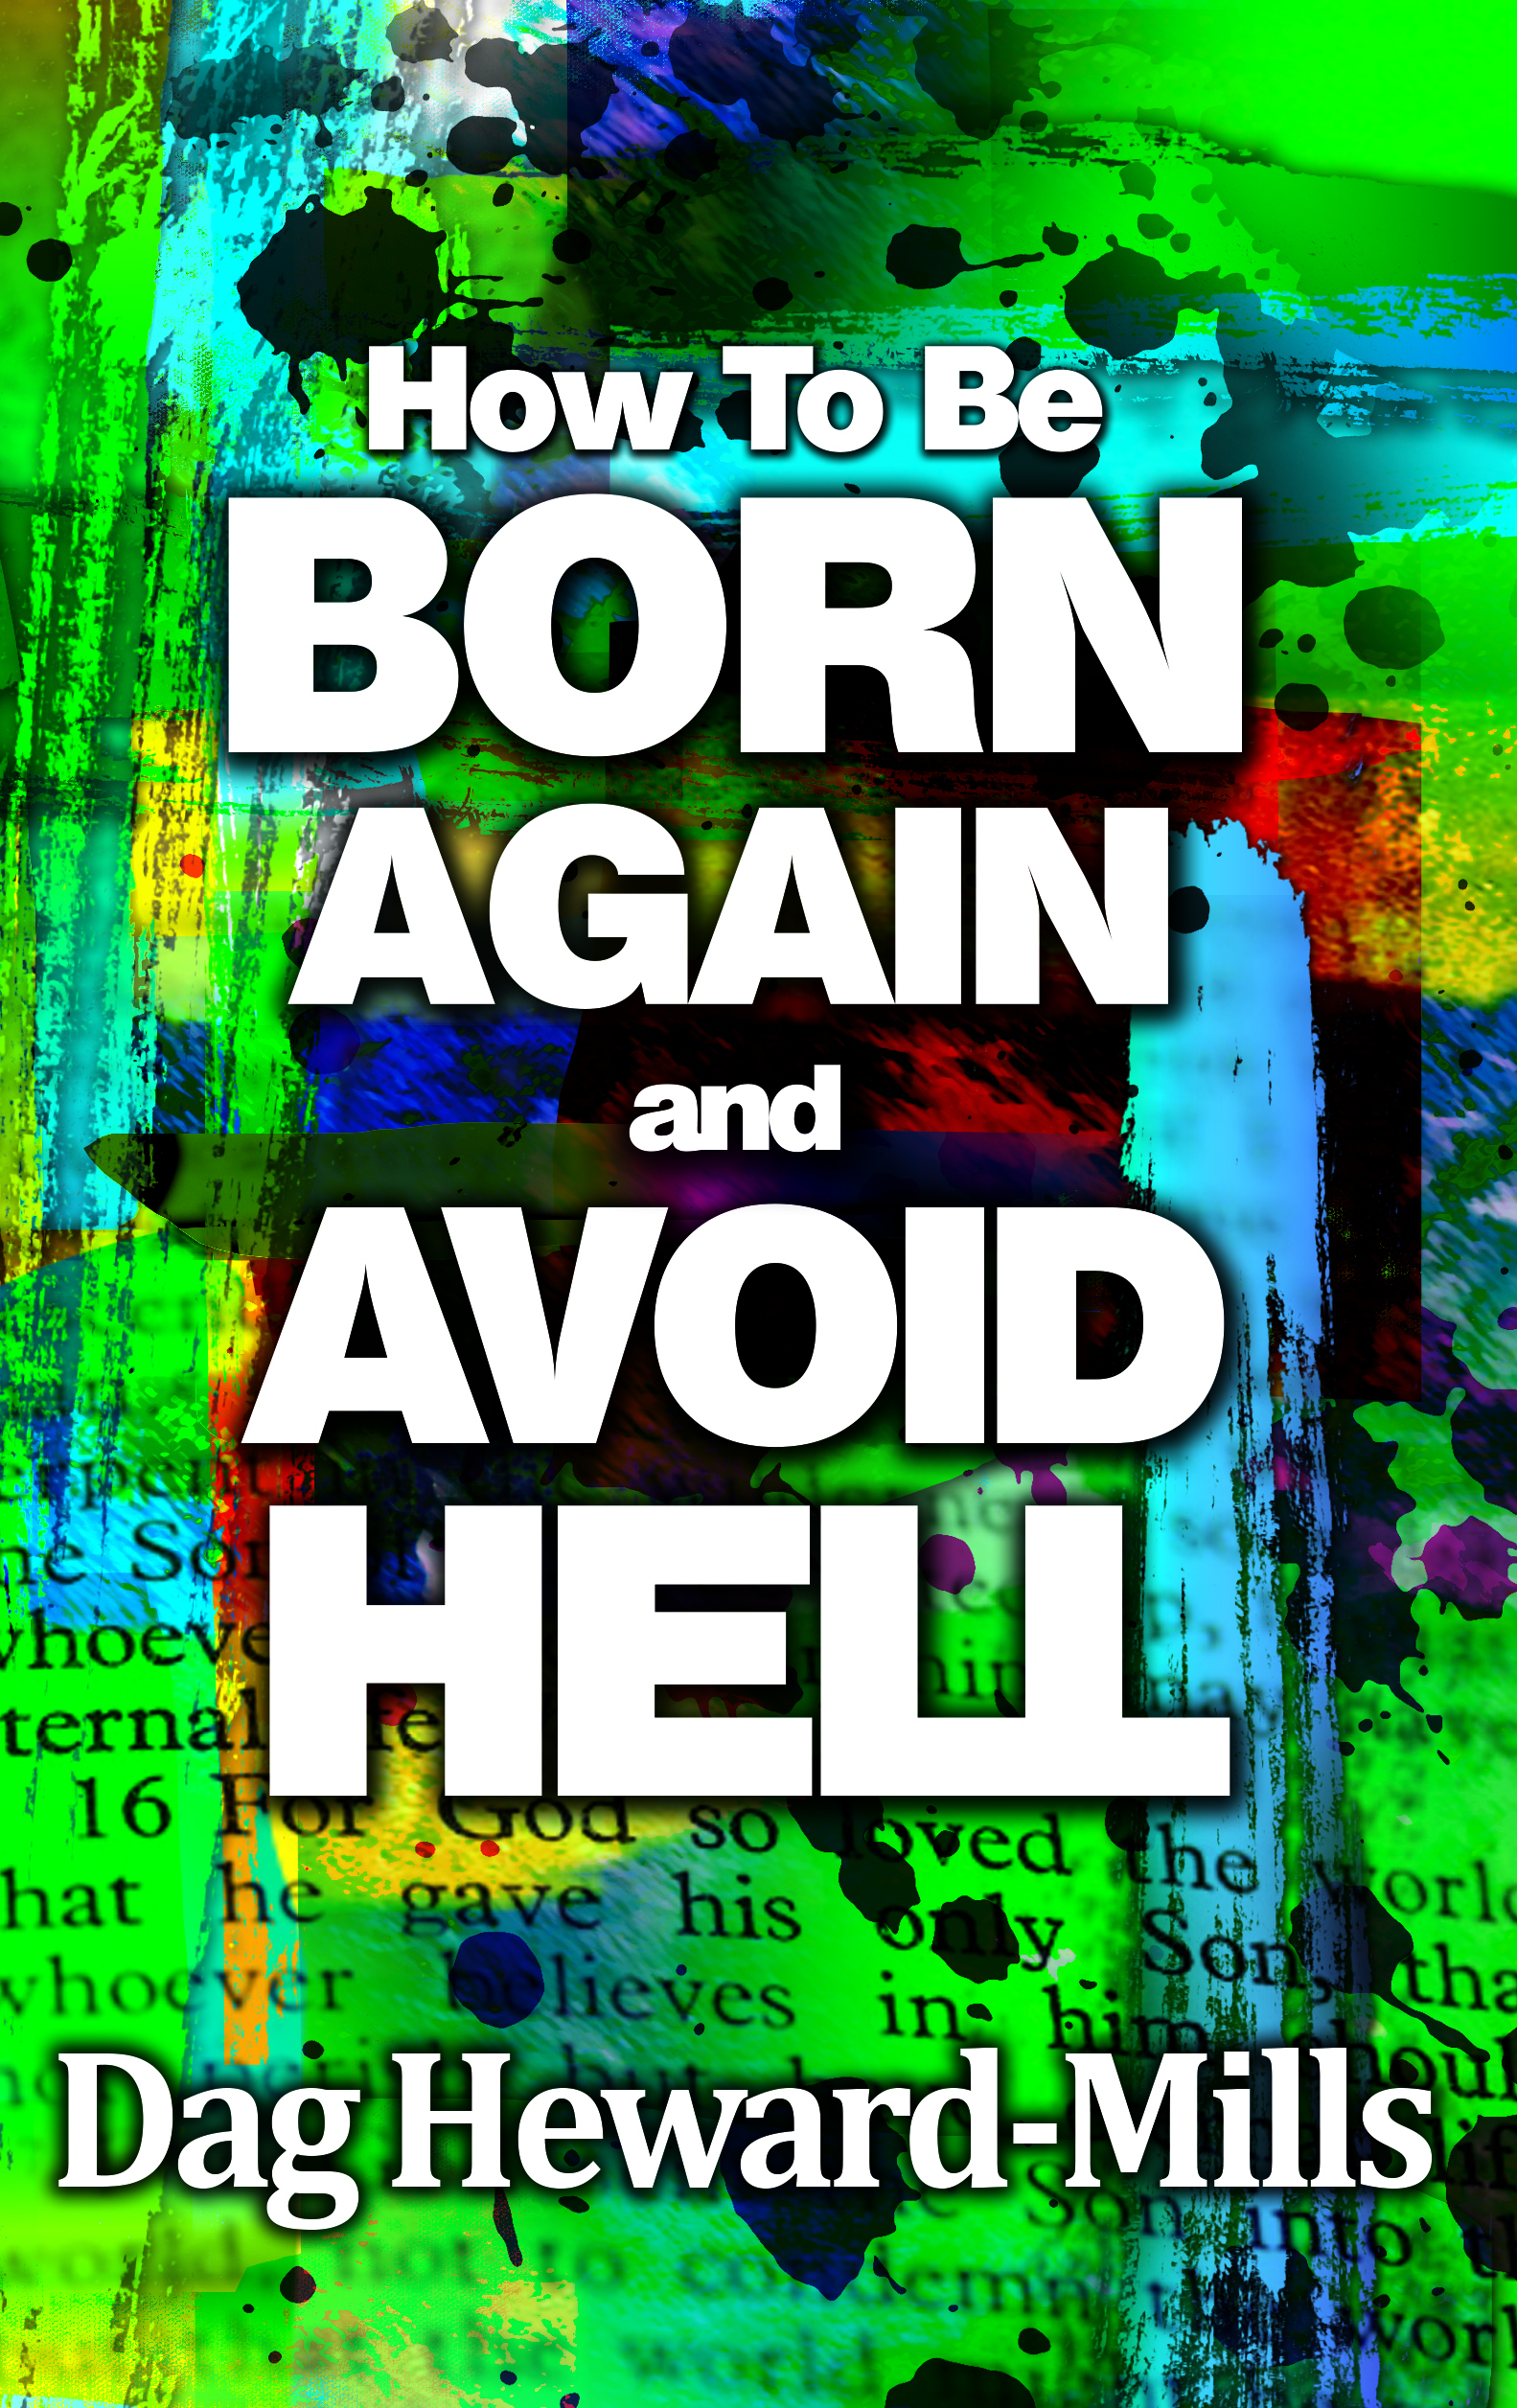 How to be Born Again by Dag Heward-Mills